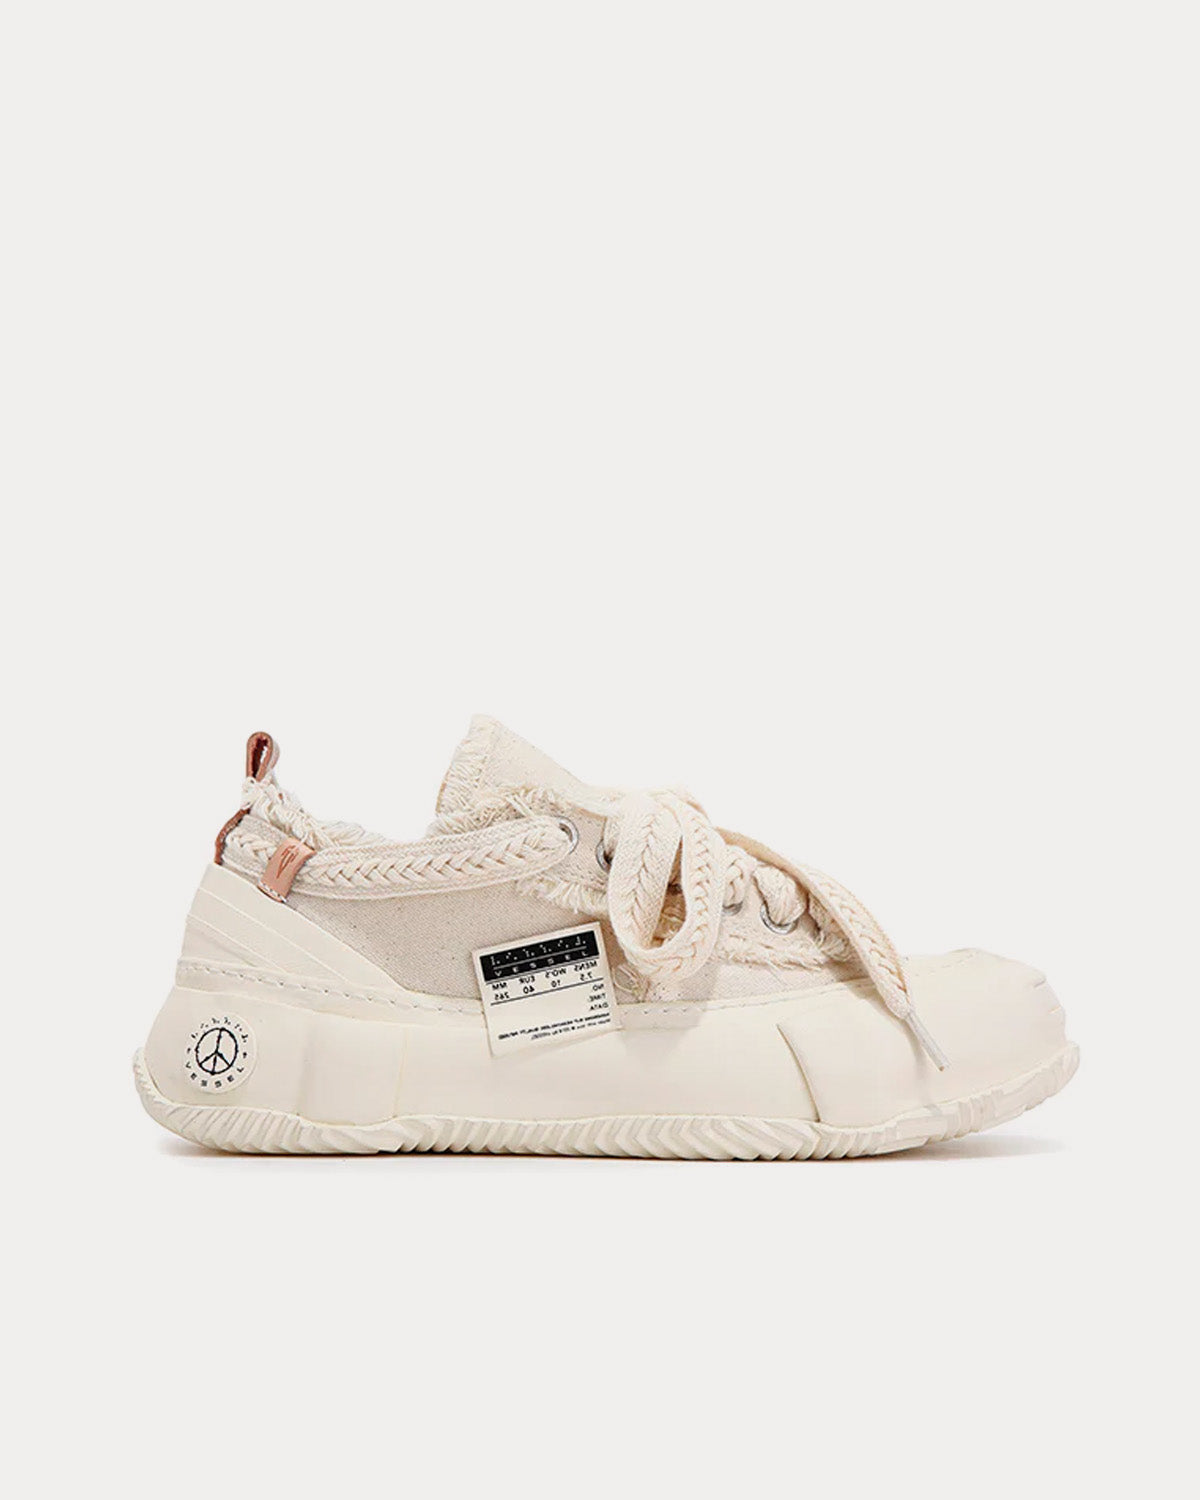 xVESSEL - G.O.P. 2.0 Marshmallow White / White Low Top Sneakers